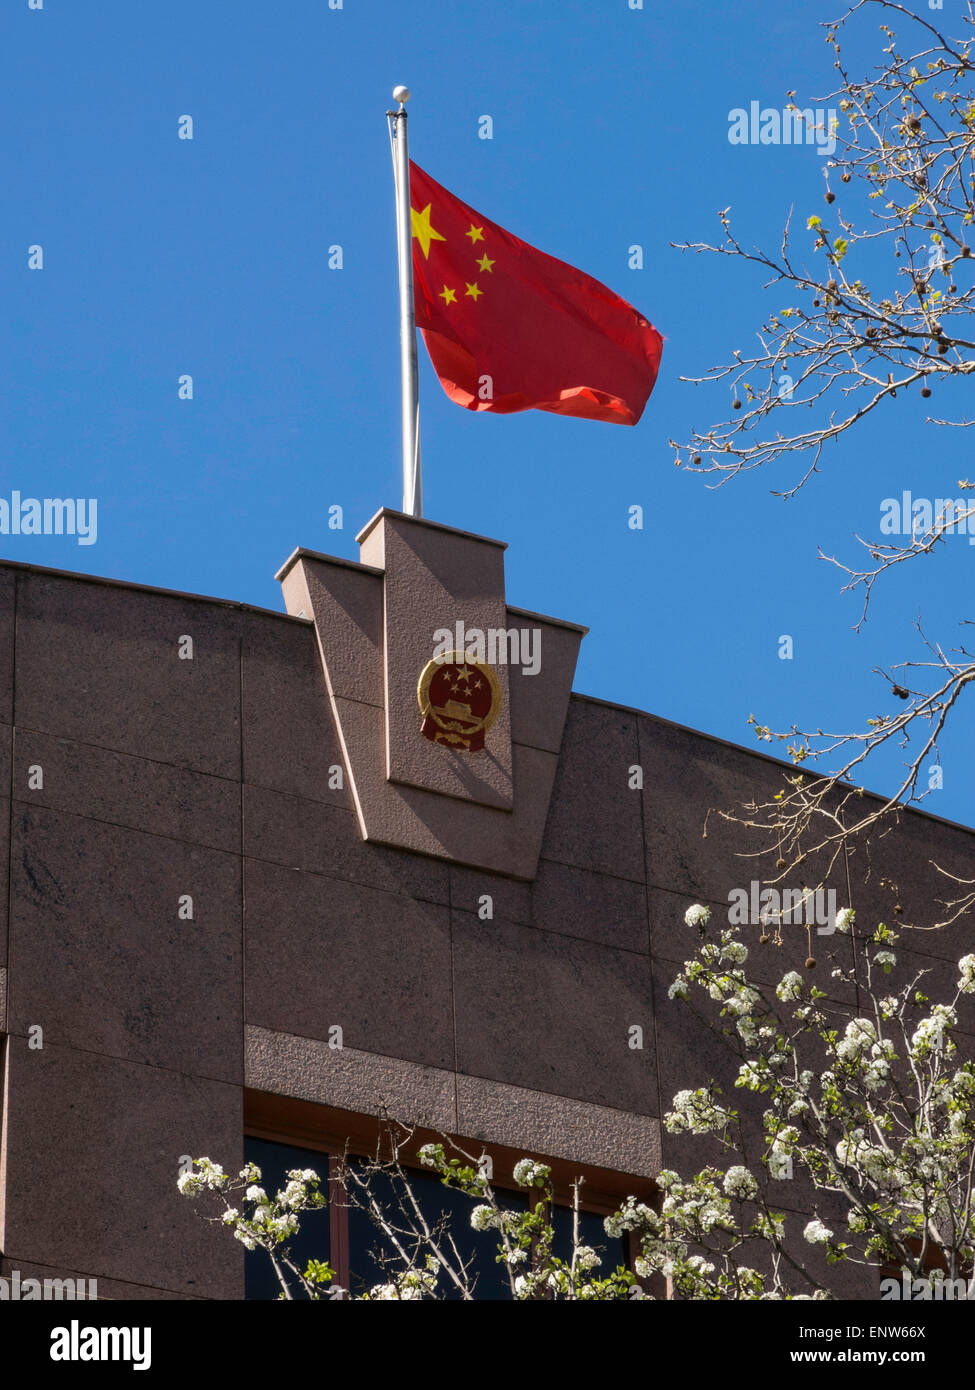 People's Republic of China Flag, NYC Stock Photo